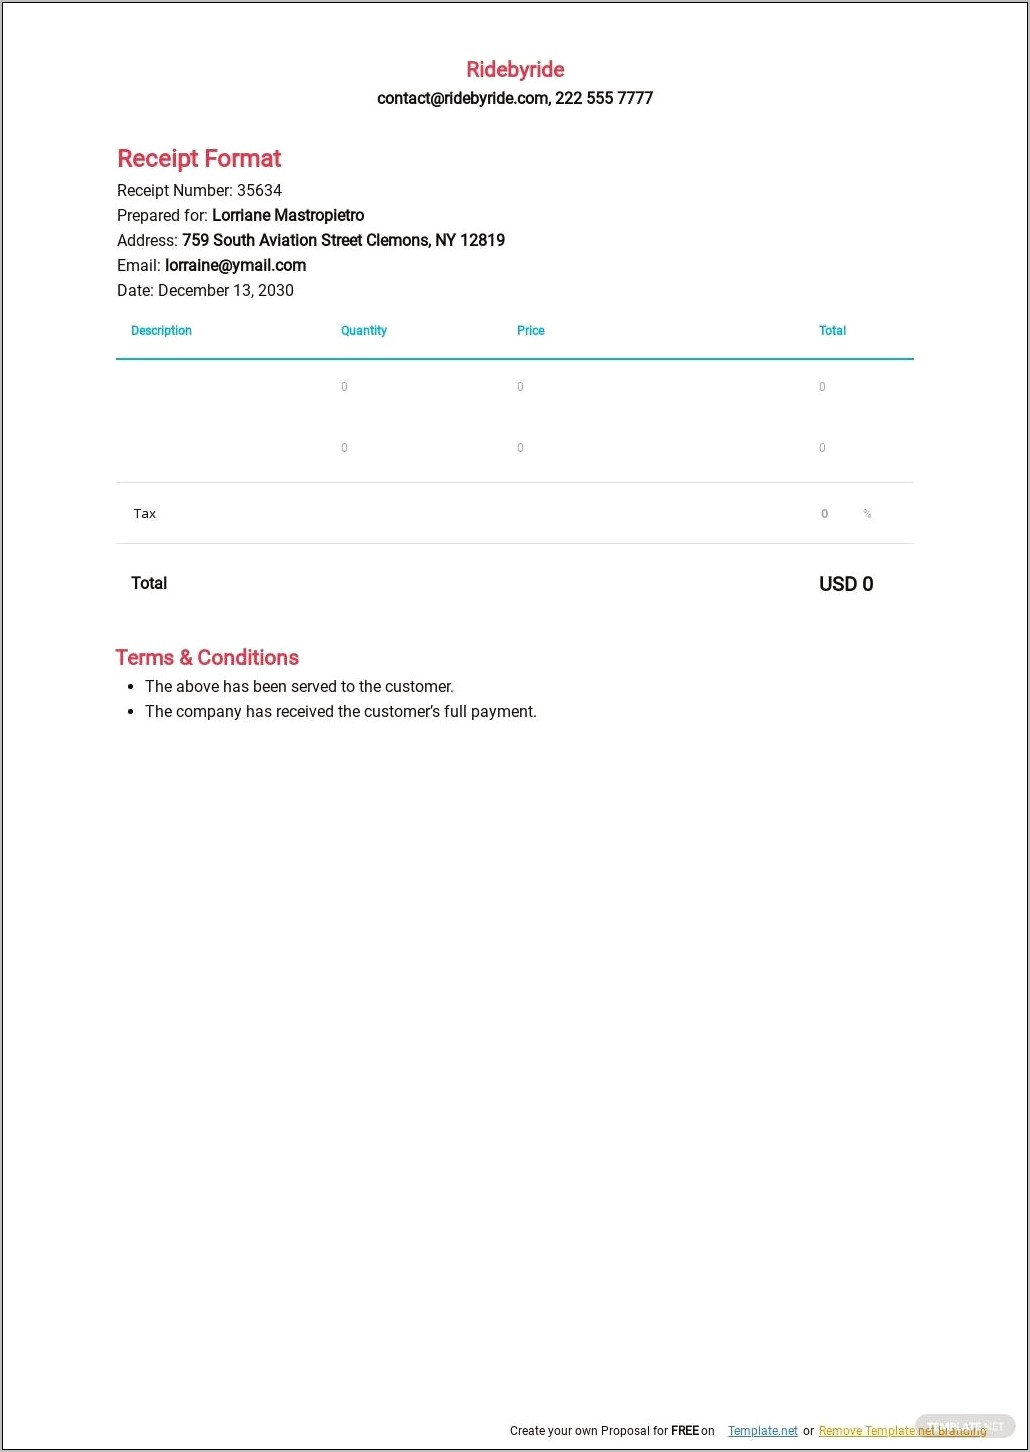 official-receipt-template-excel-free-download-resume-example-gallery